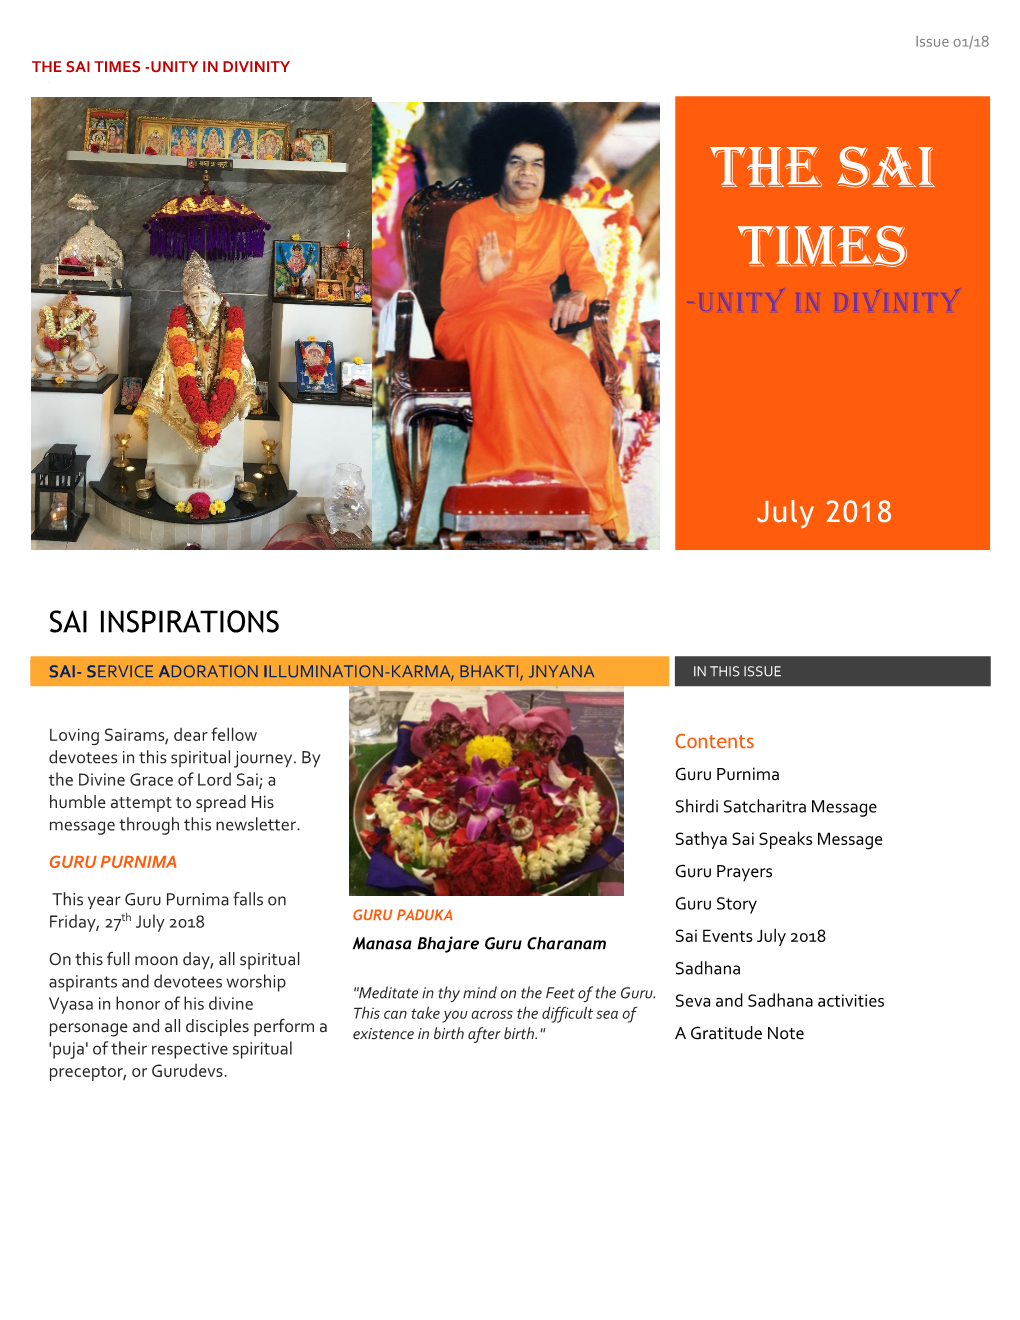 The Sai Times -Unity in Divinity